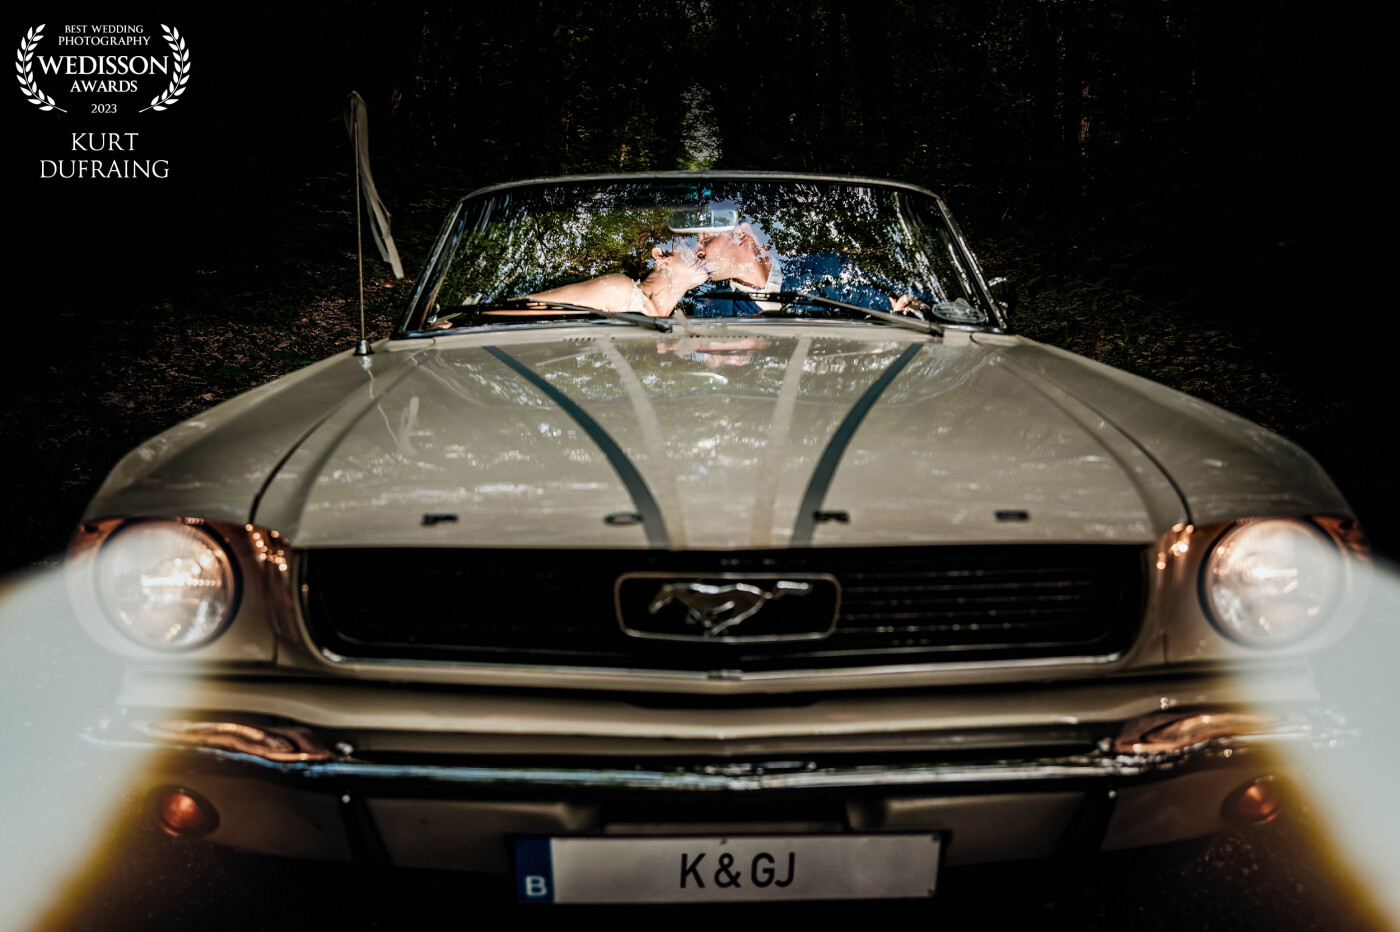 This couple breathes rock & roll and was therefore open to a characterful shoot. The beautiful car on the forest road gives a mysterious atmosphere and looks like a scene from a road movie.